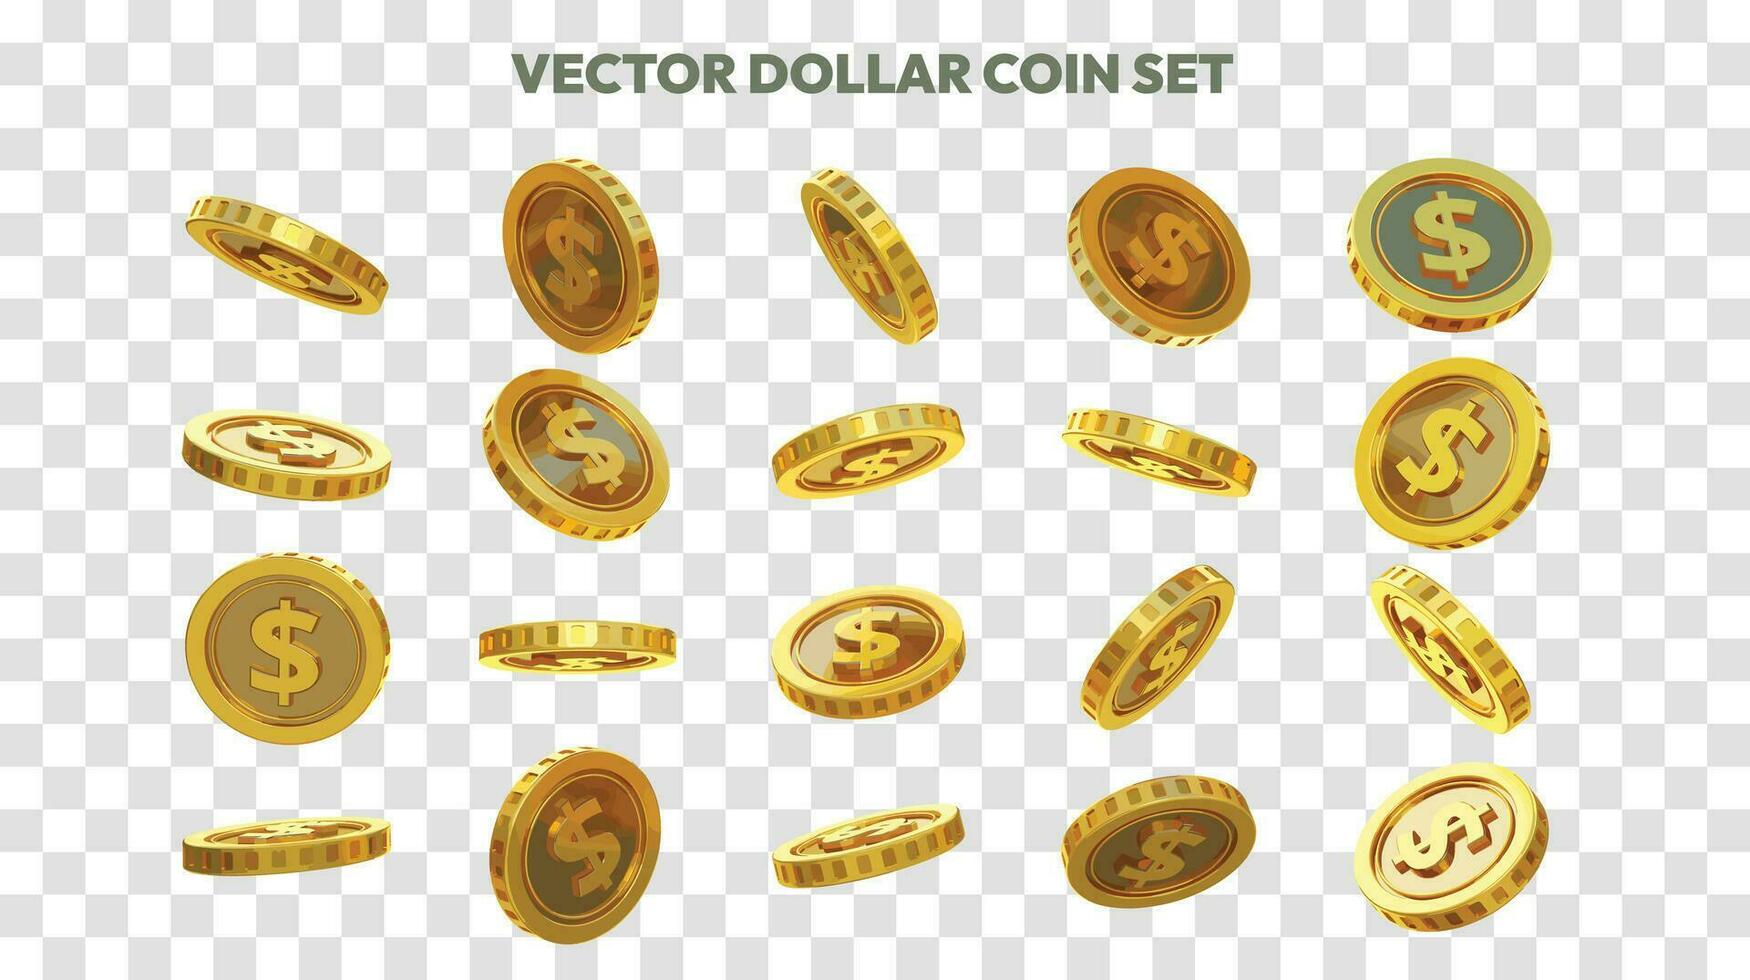 Vector illustration of set of abstract golden US dollar coins in different angles and orientations. Dollar Currency sign on coin design in Scalable eps format